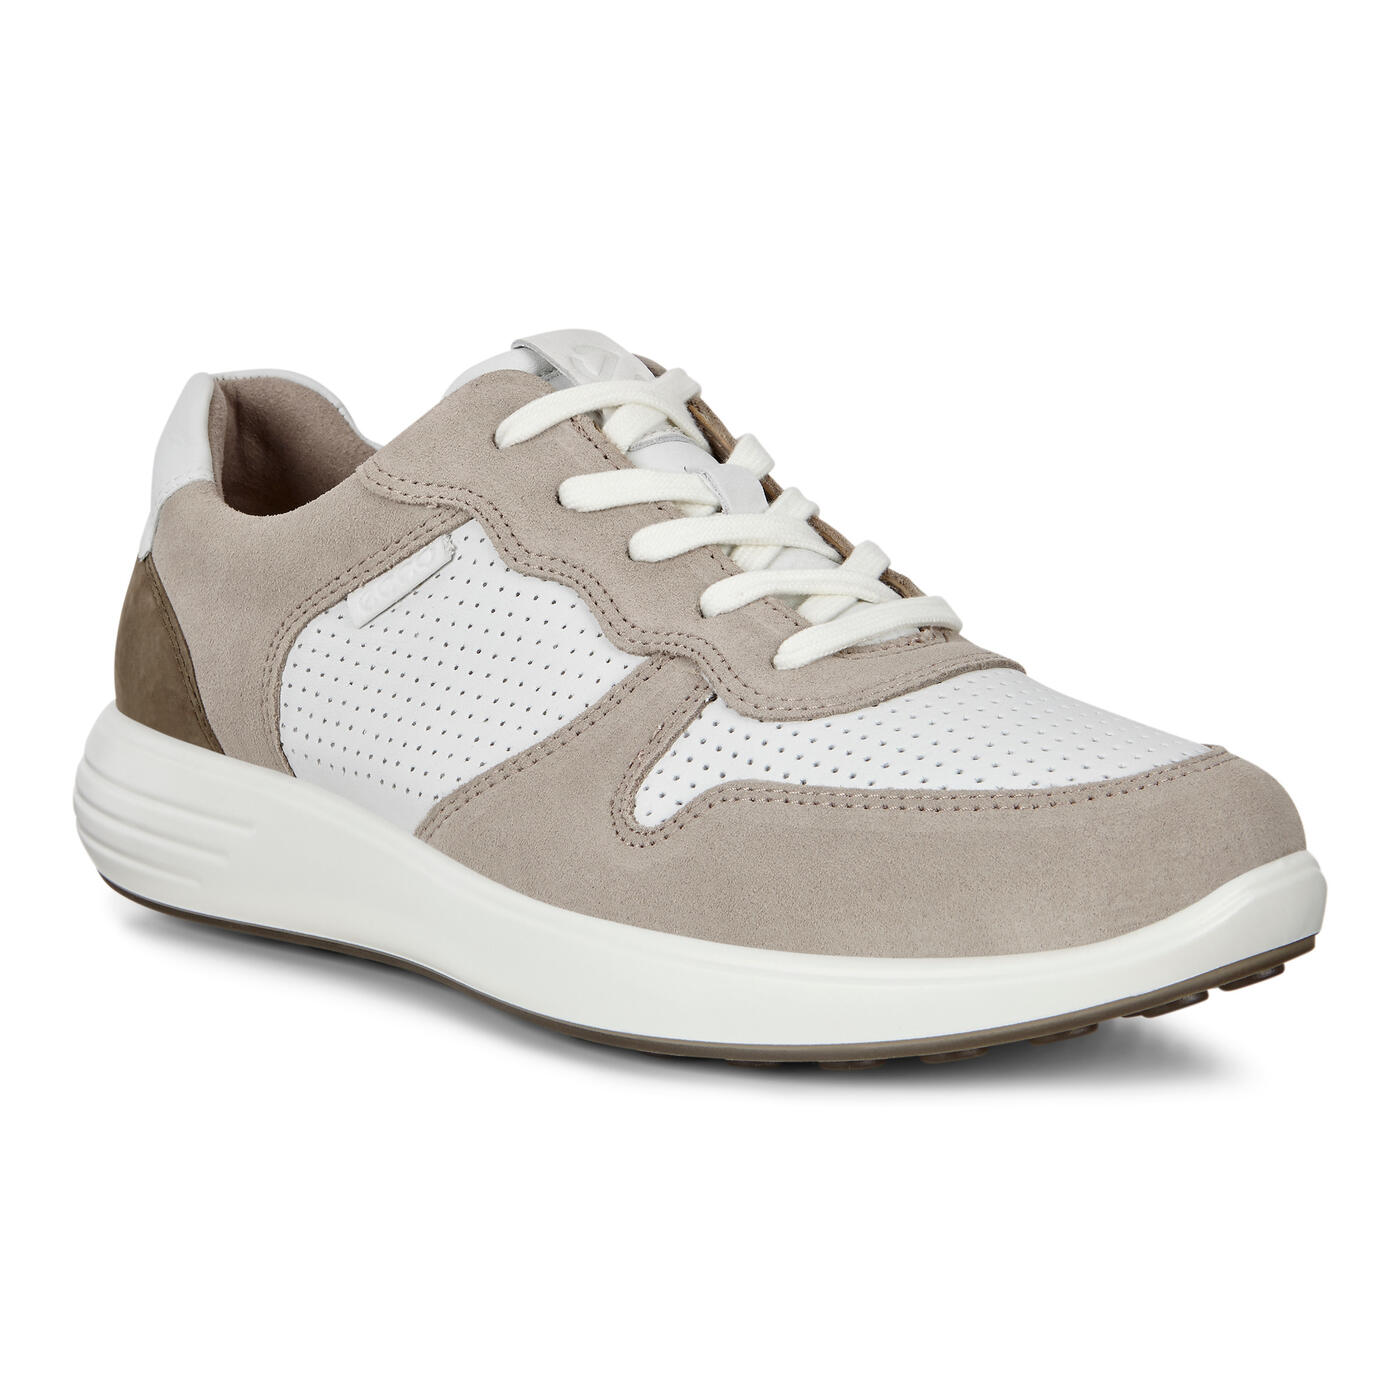 Men's Soft 7 Runner Perforated Sneakers | ECCO® Shoes